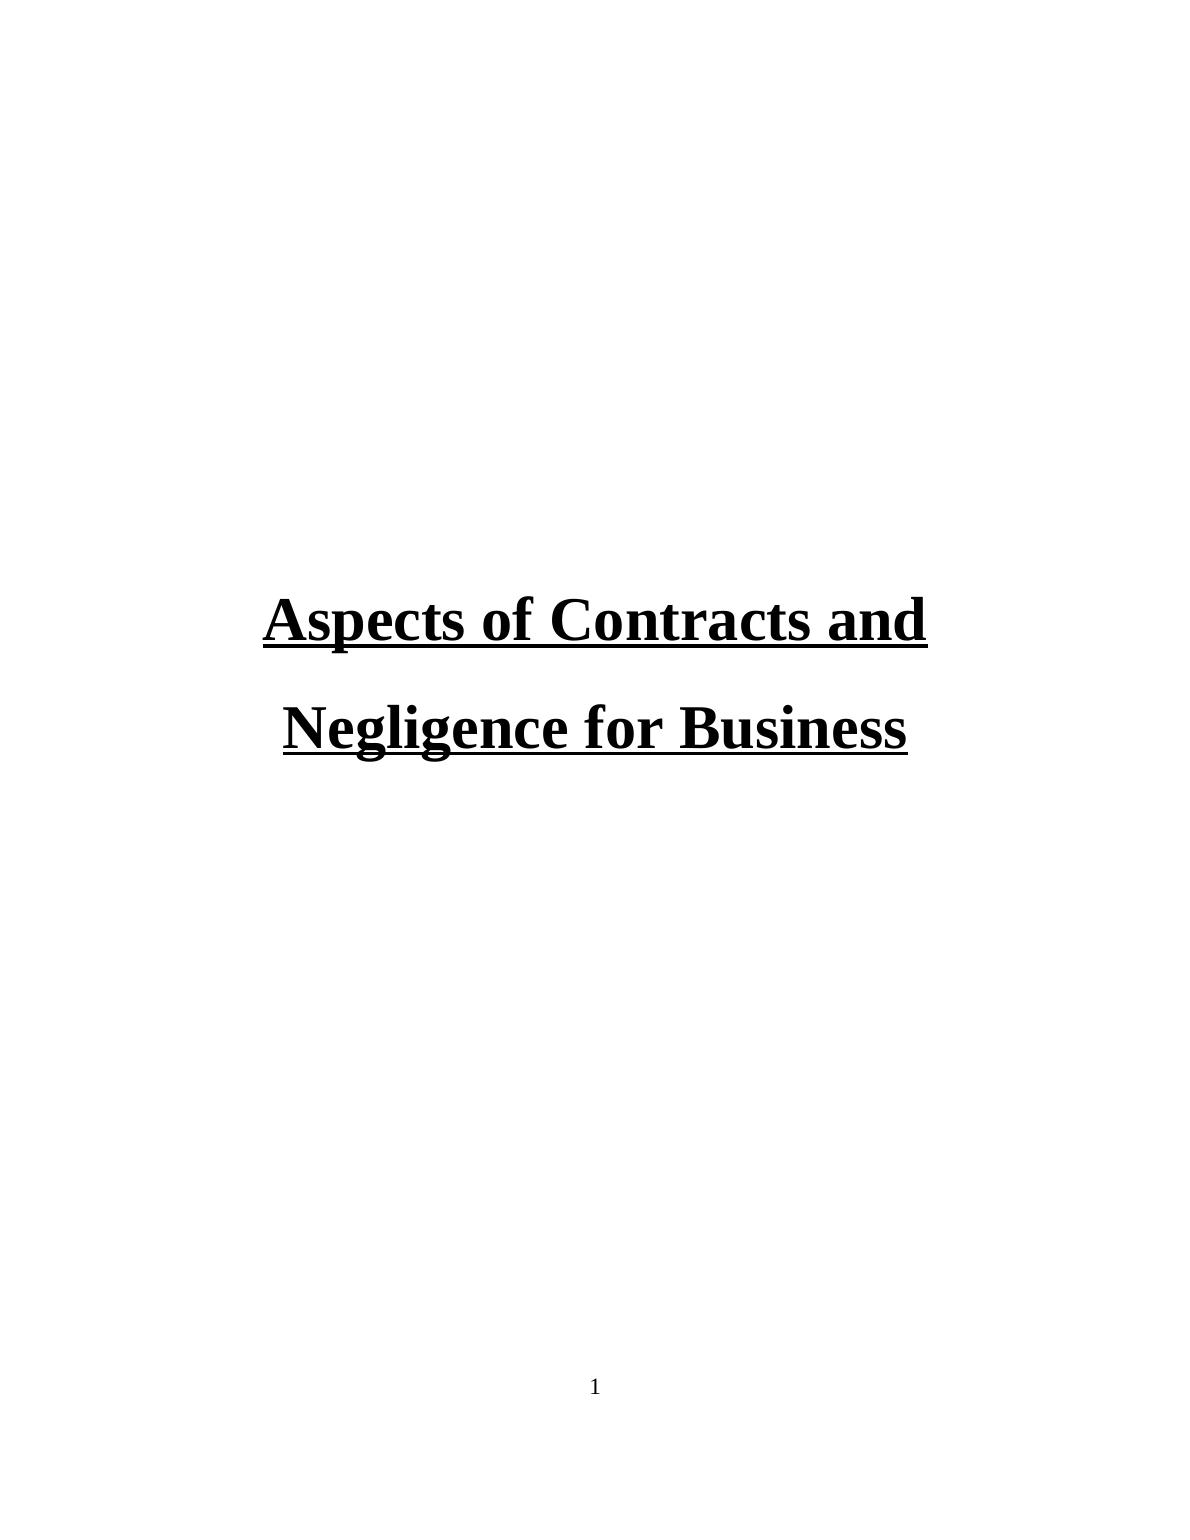 Principles of Liability in Negligence in Business - Report_1